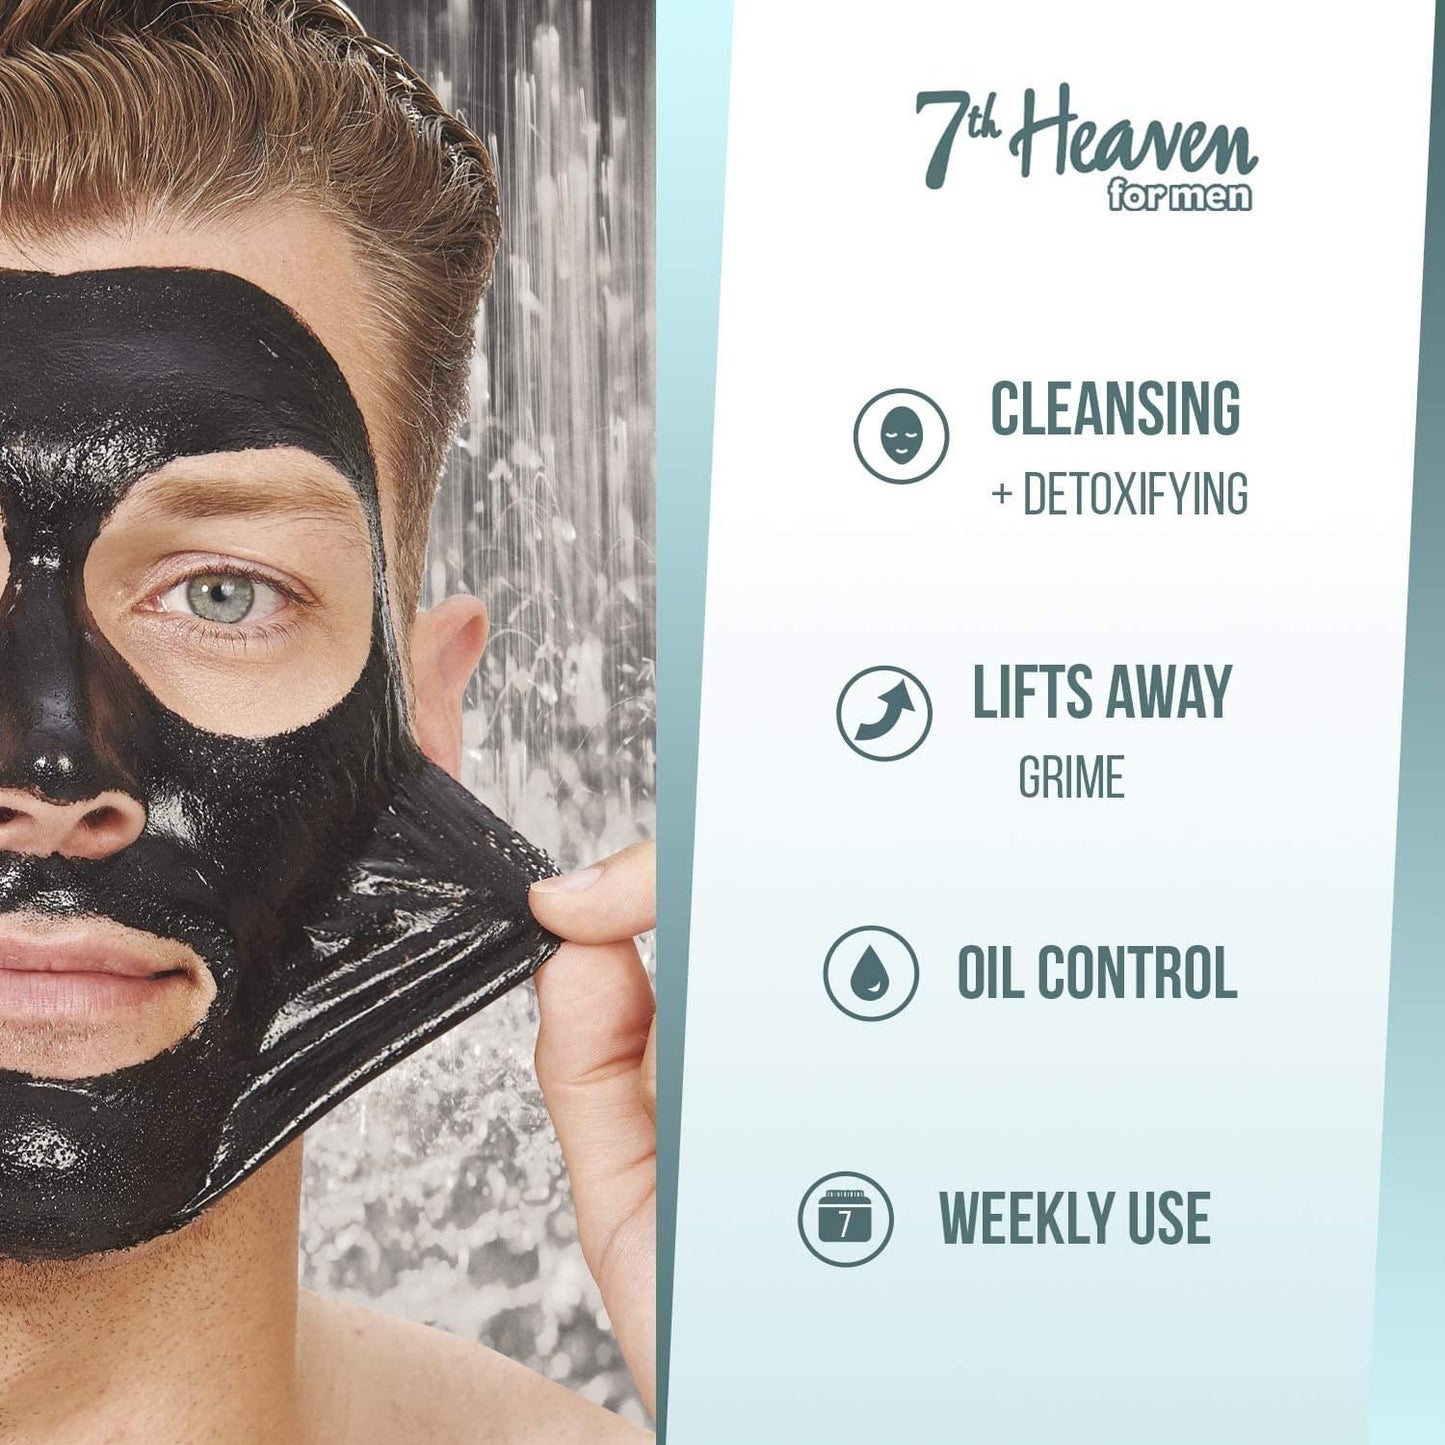 7th Heaven Activated Charcoal Black Clay Peel Off Face Mask for Men, Cleanse and Detoxify, Lifts Away Grime, Oil Control, 125ml